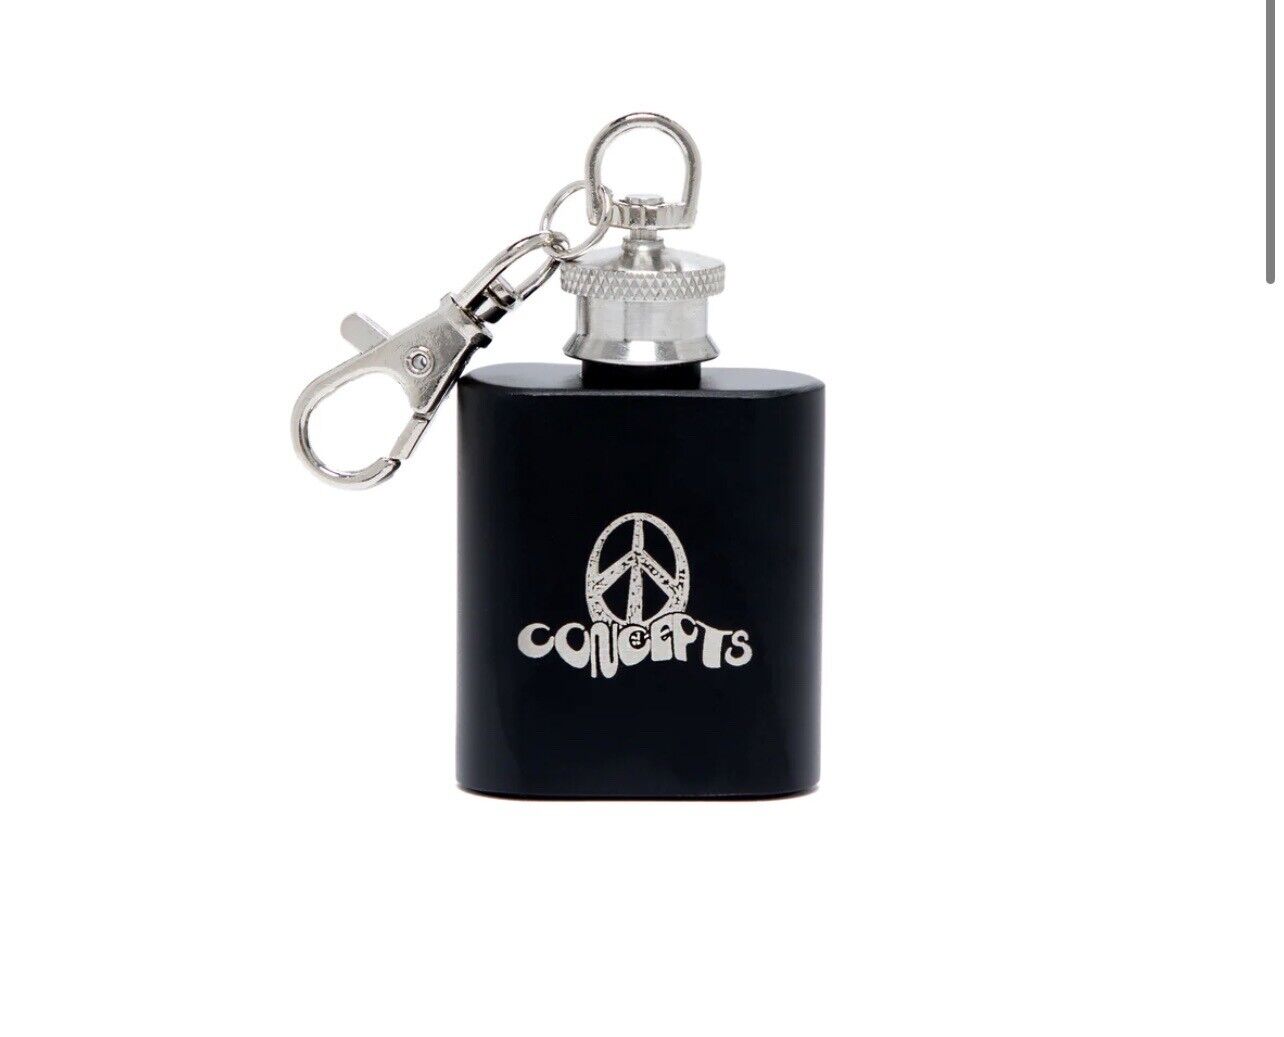 CONCEPTS Black Flask Keychain NEW IN BOX NEVER USED PEACE SIGN LOGO HIPPIE